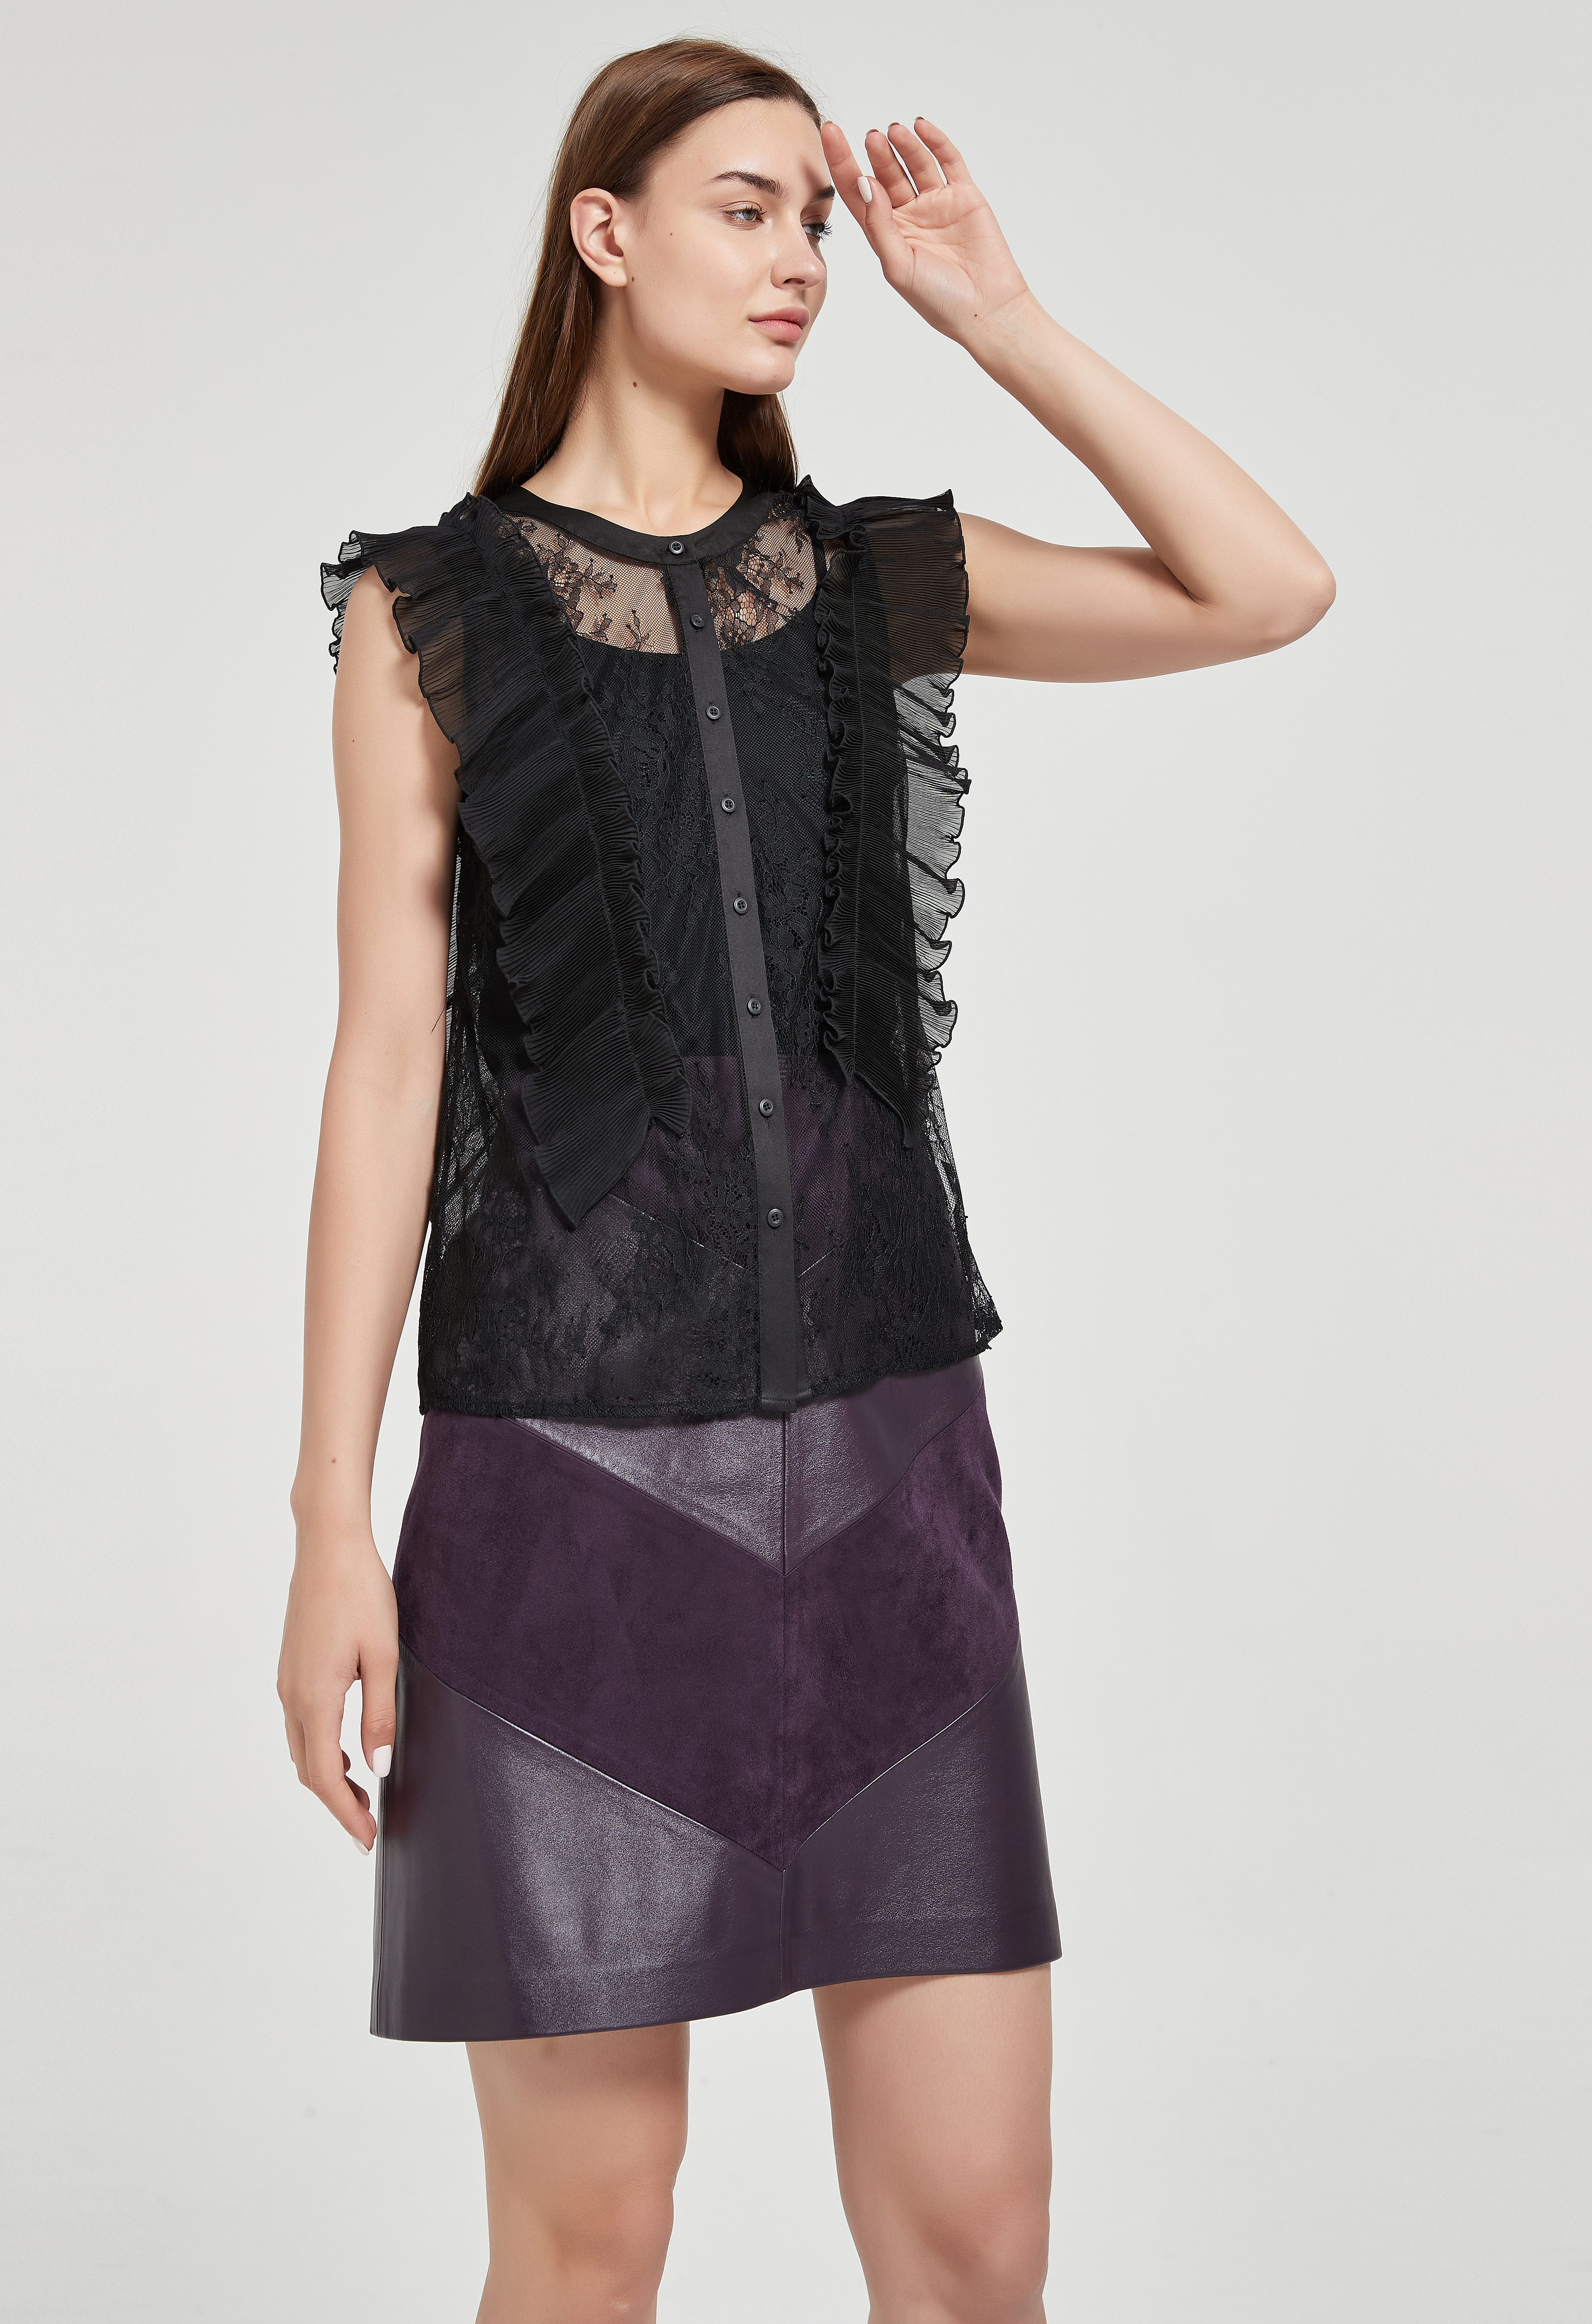 Lady's 100% Polyester Fashion Black Lace Sleeveless Top